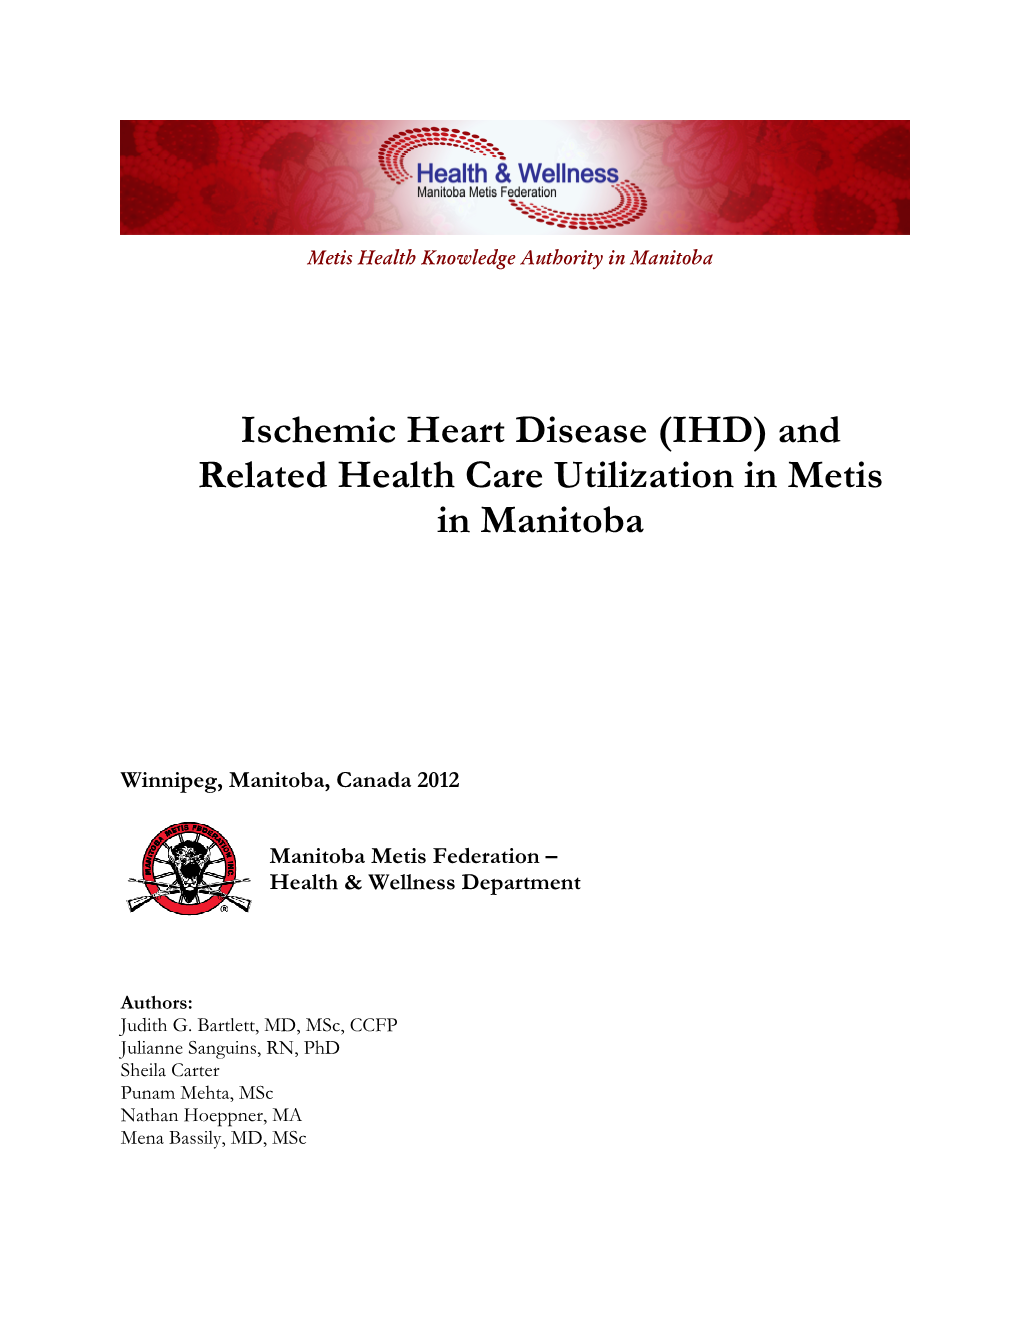 Ischemic Heart Disease (IHD) and Related Health Care Utilization in Metis in Manitoba